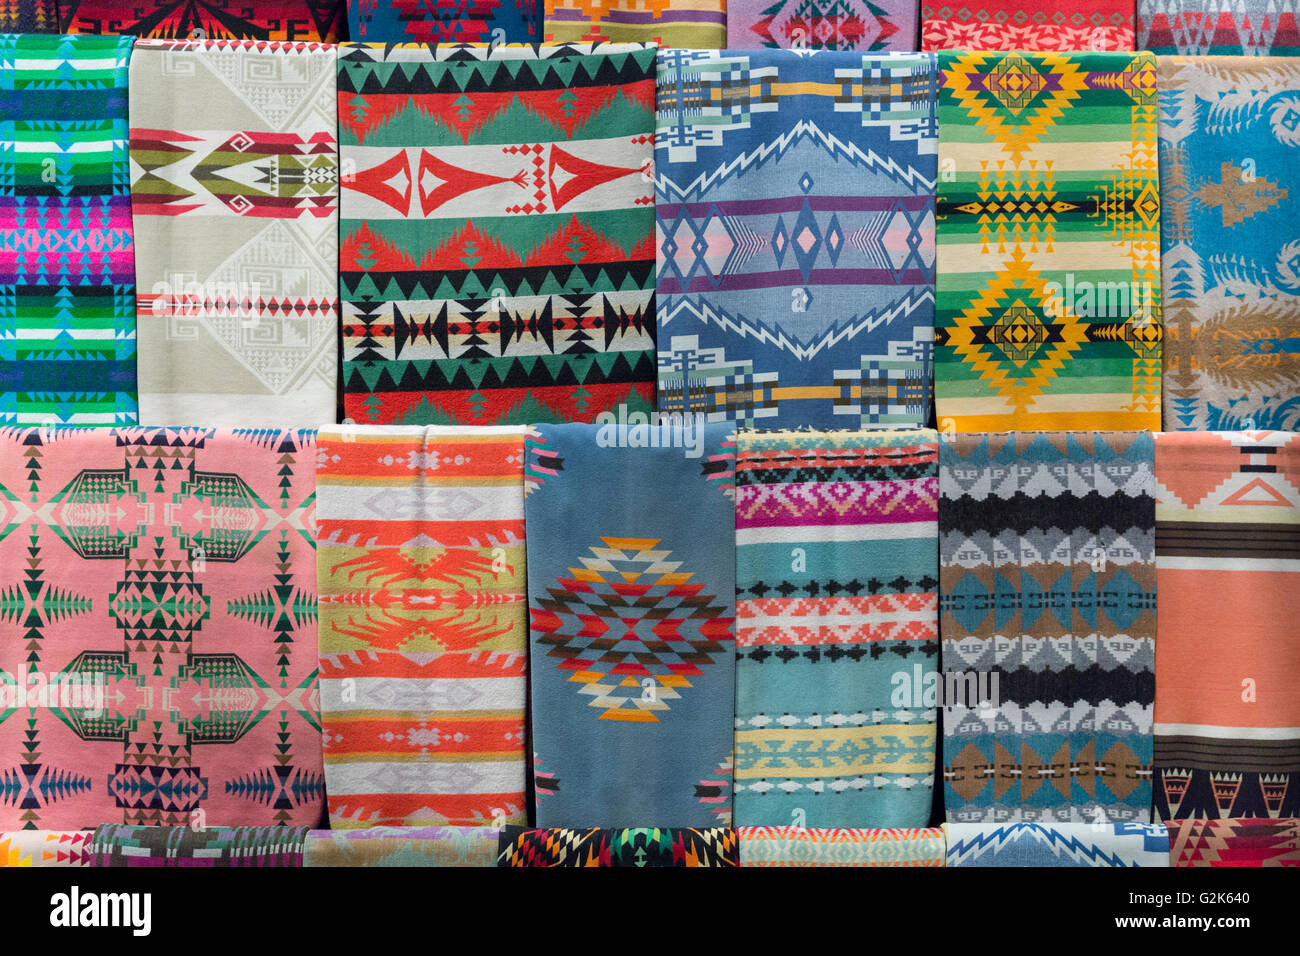 Native American Blanket High Resolution Stock Photography And Images Alamy